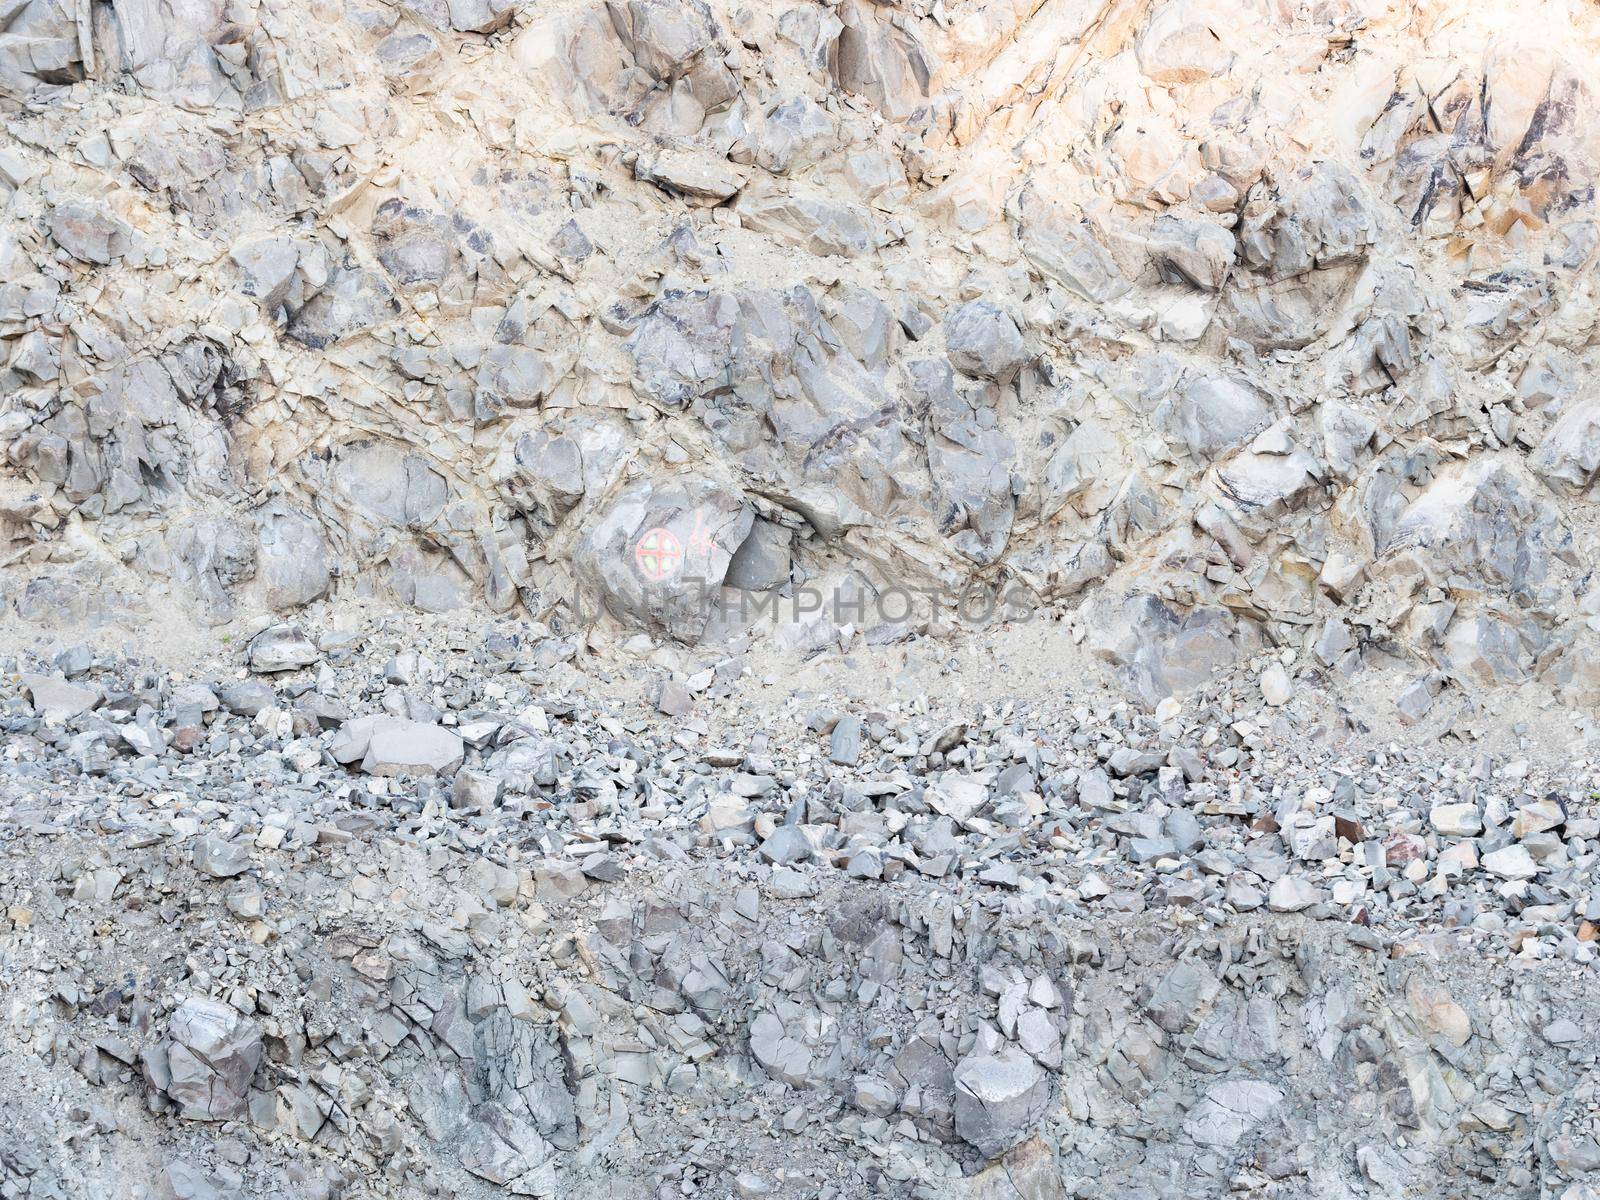 Detail of a stone pit in stone quarry. Industrial site, granite gravel mining in open pit.